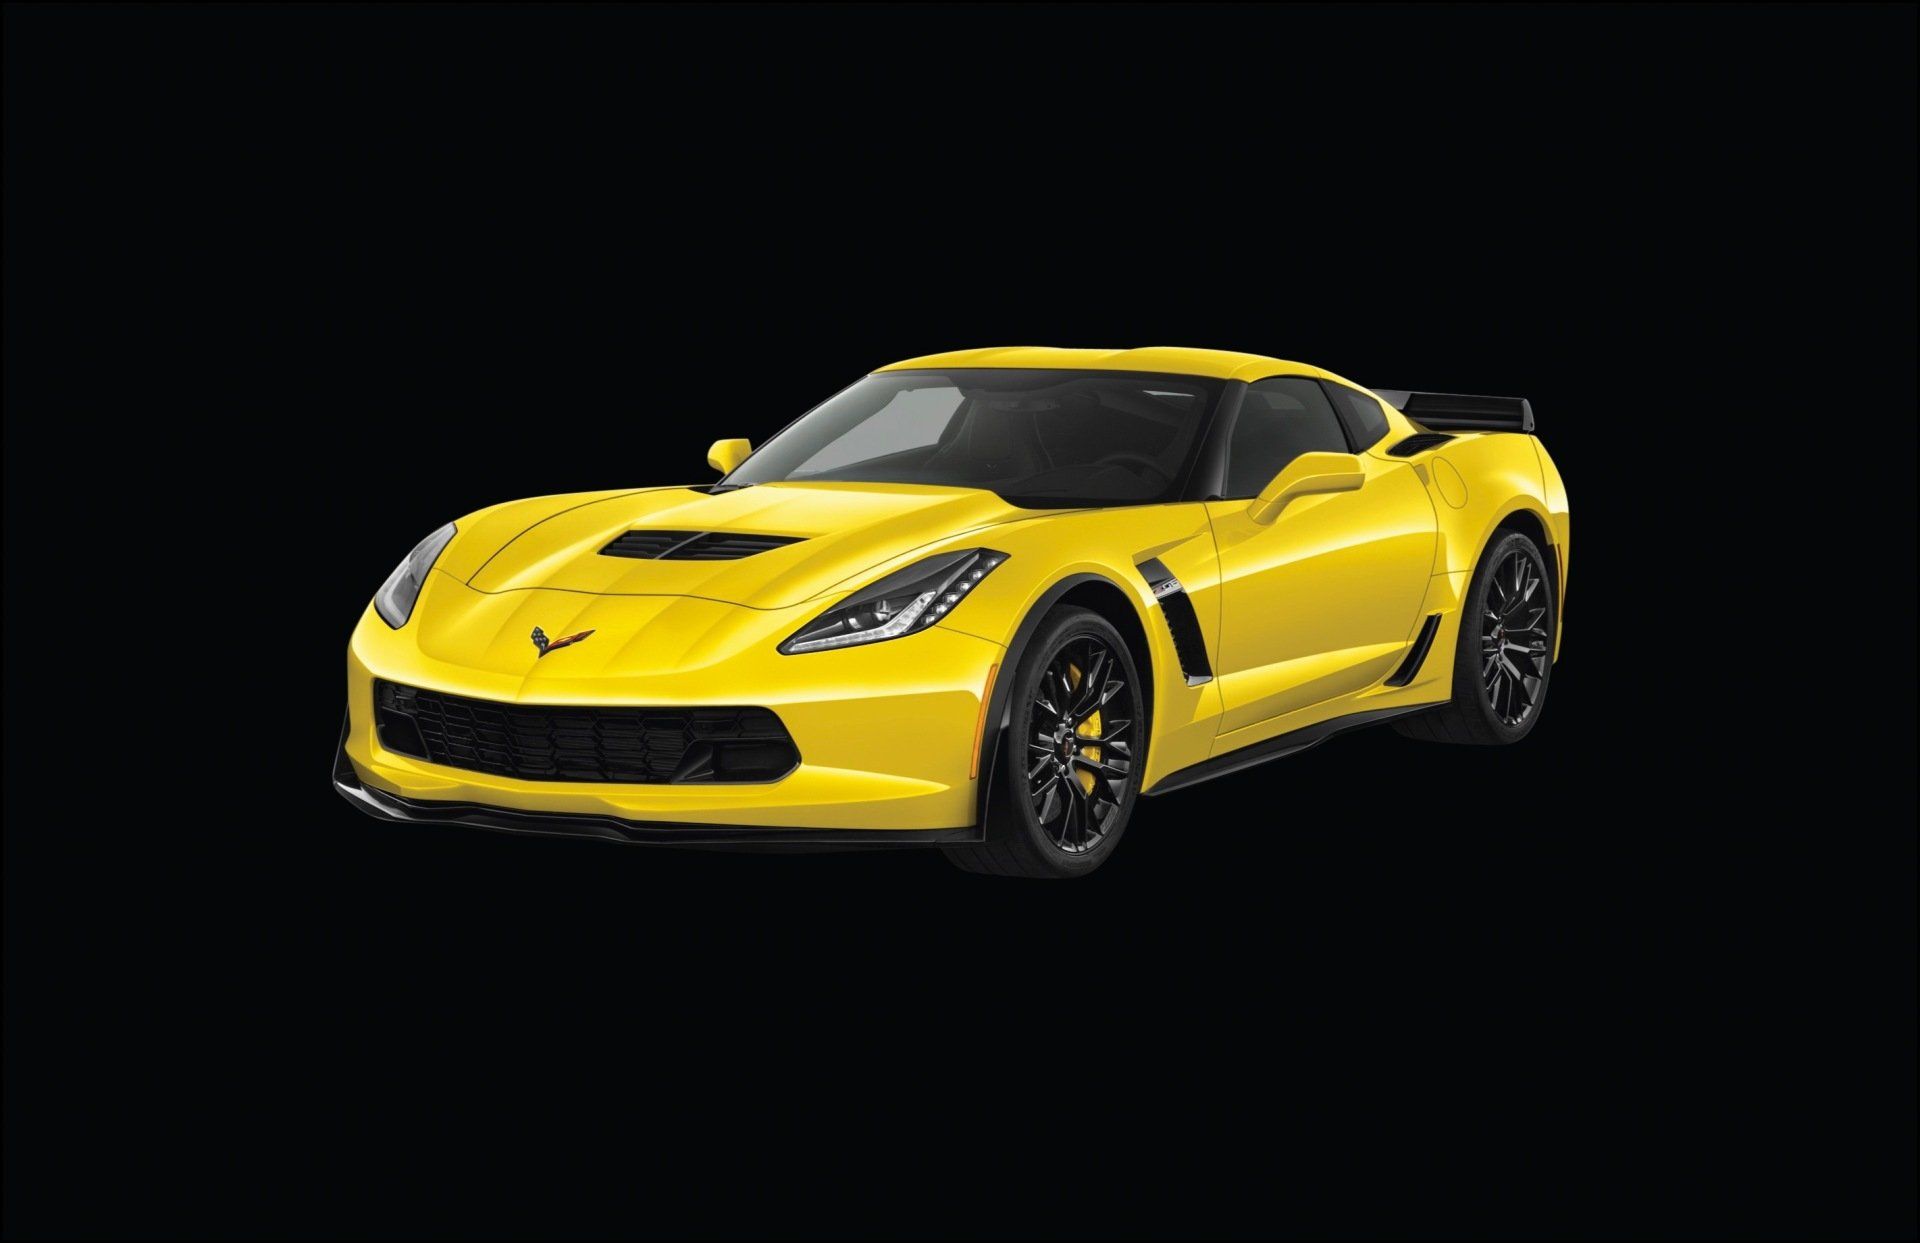 A yellow corvette zr1 is on a black background.